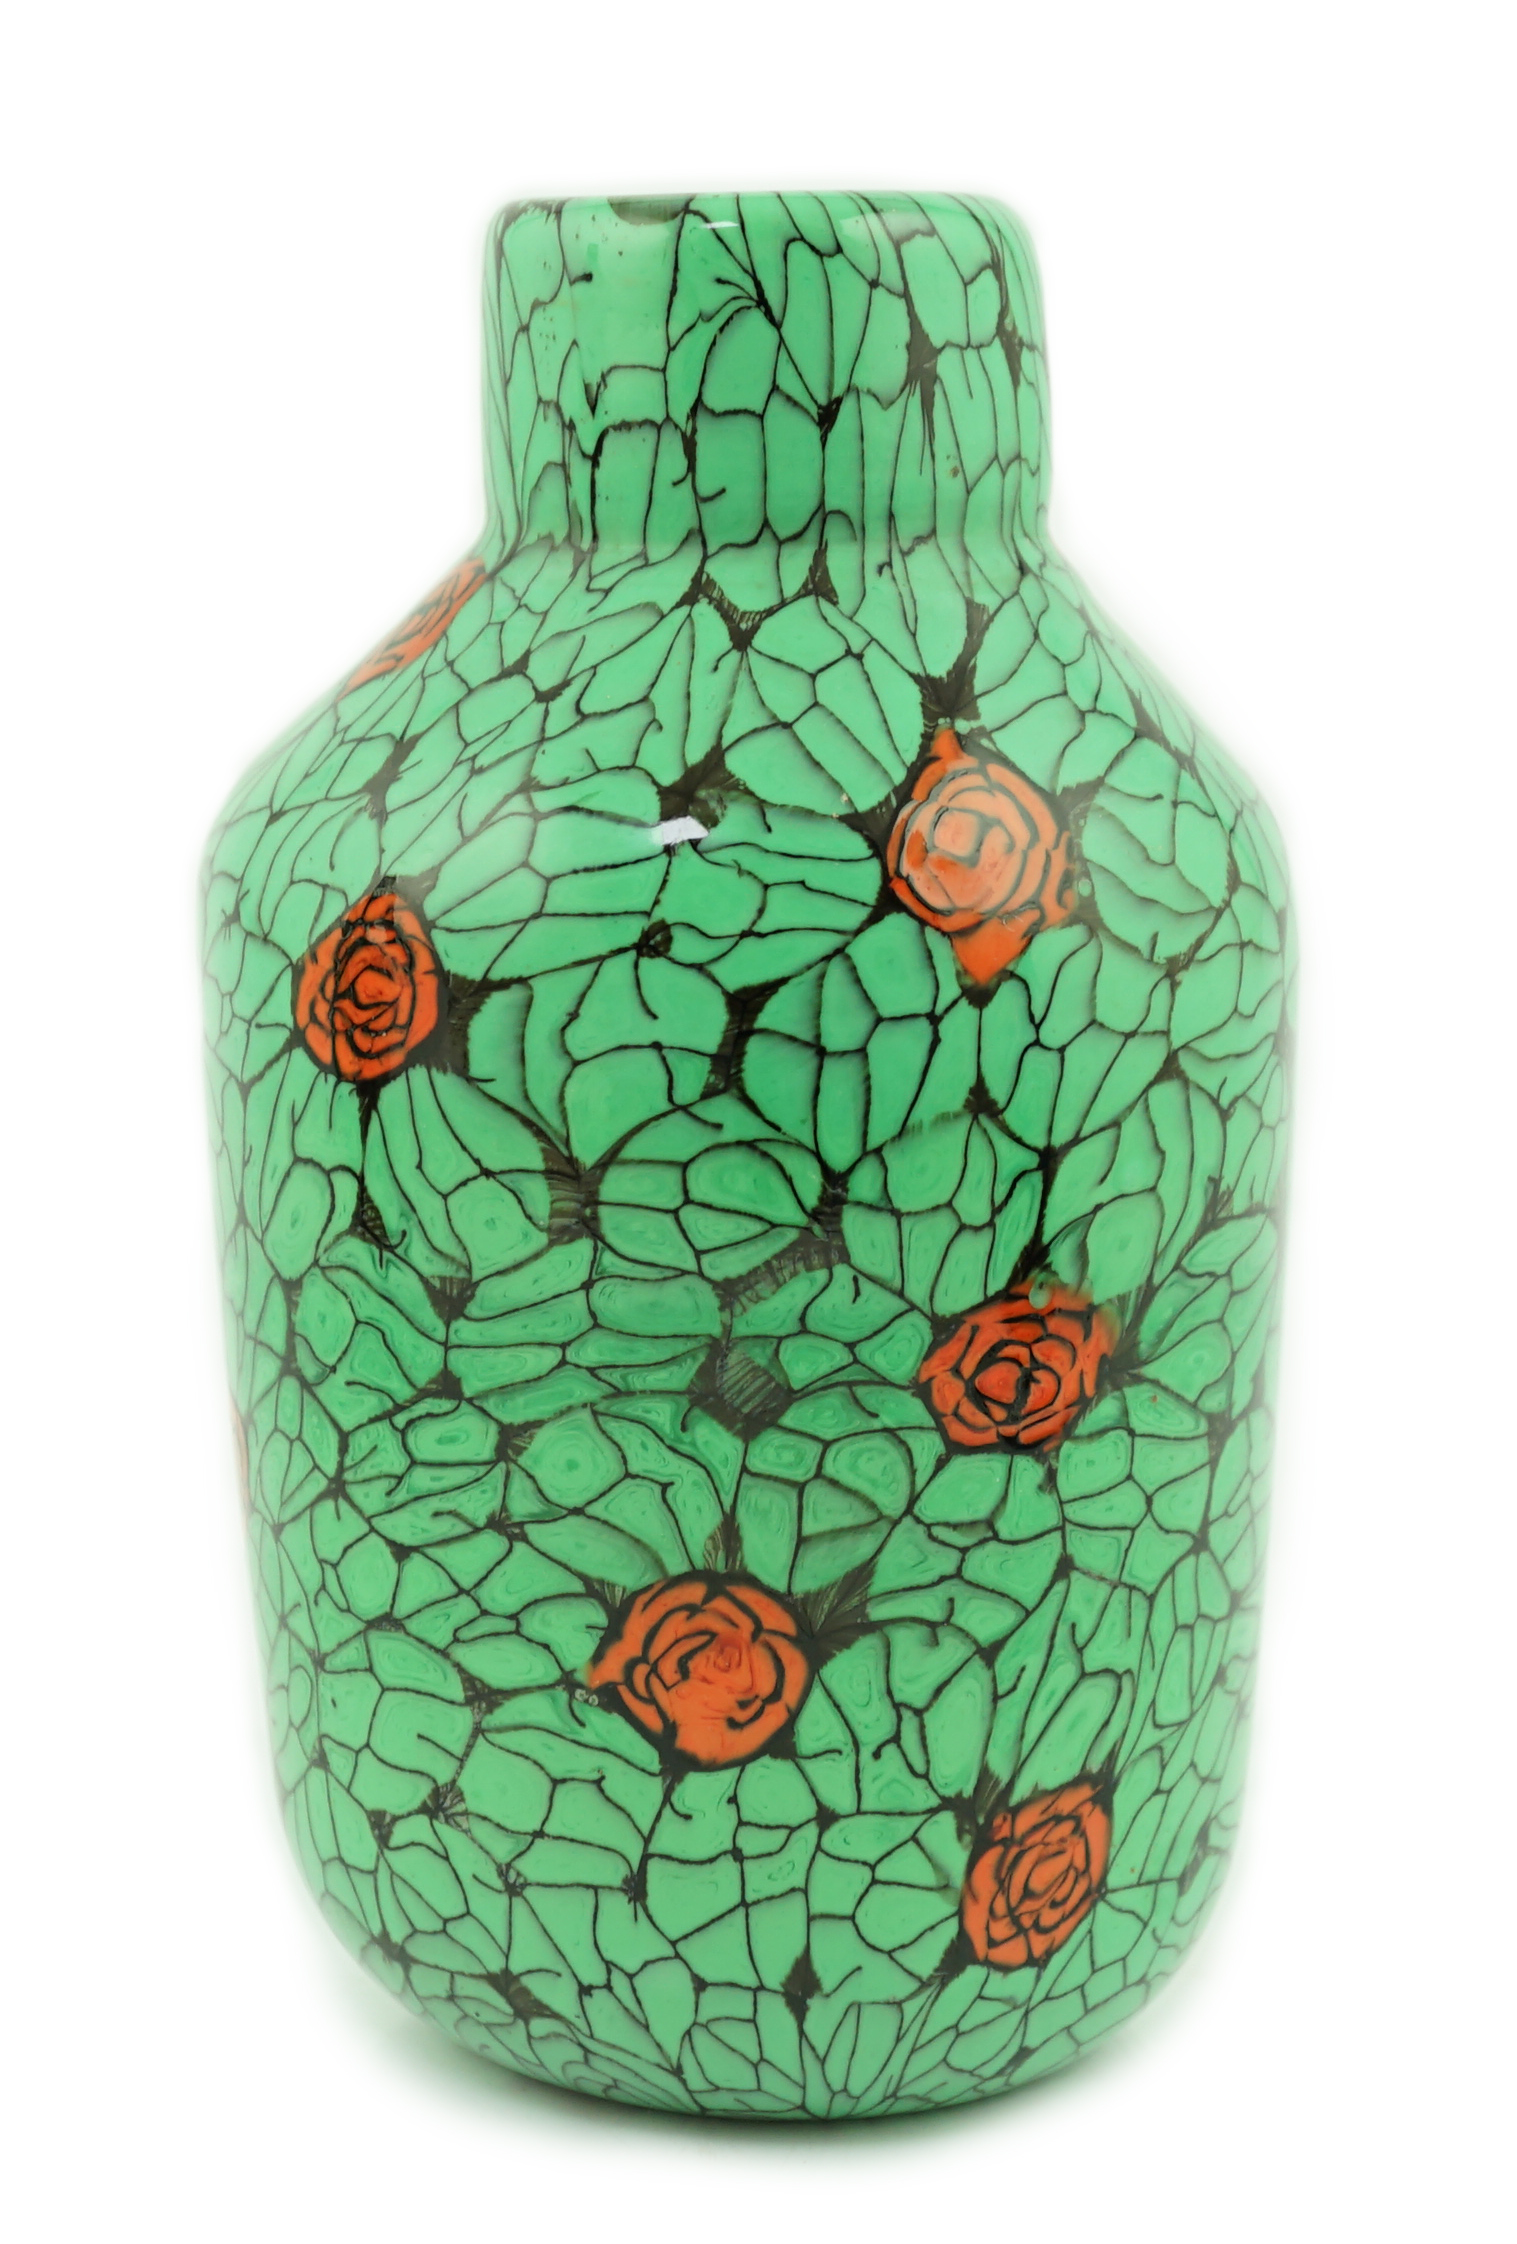 ** ** Vittorio Ferro (1932-2012) A Murano glass Murrine vase, with green leaves and red rose buds,